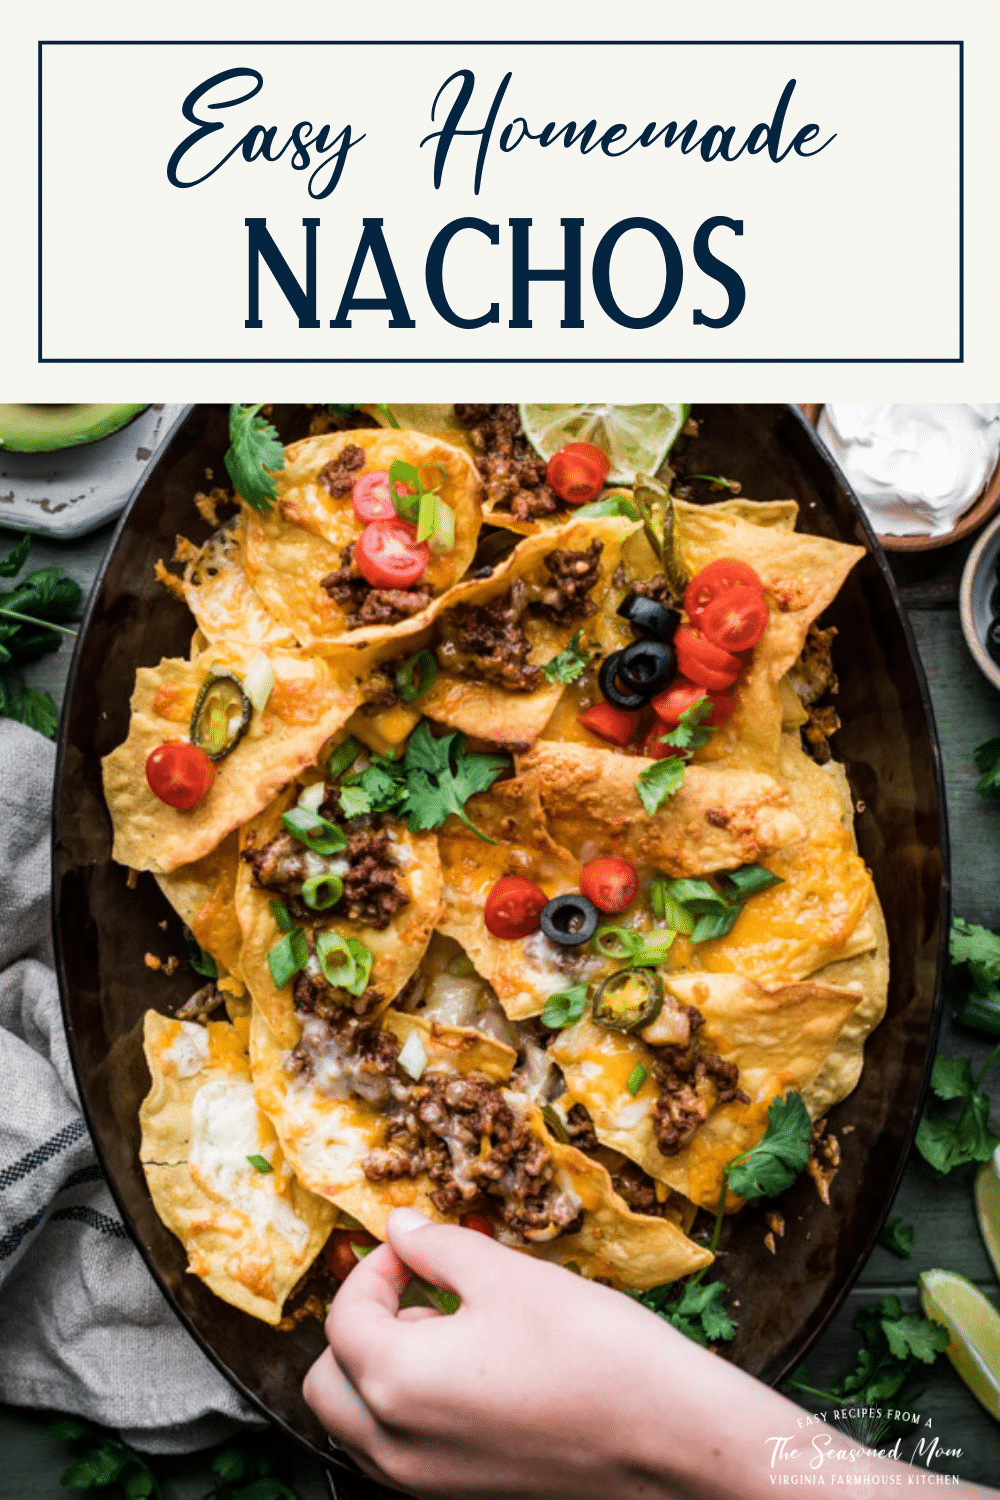 Pan of loaded homemade nachos with text title box at top